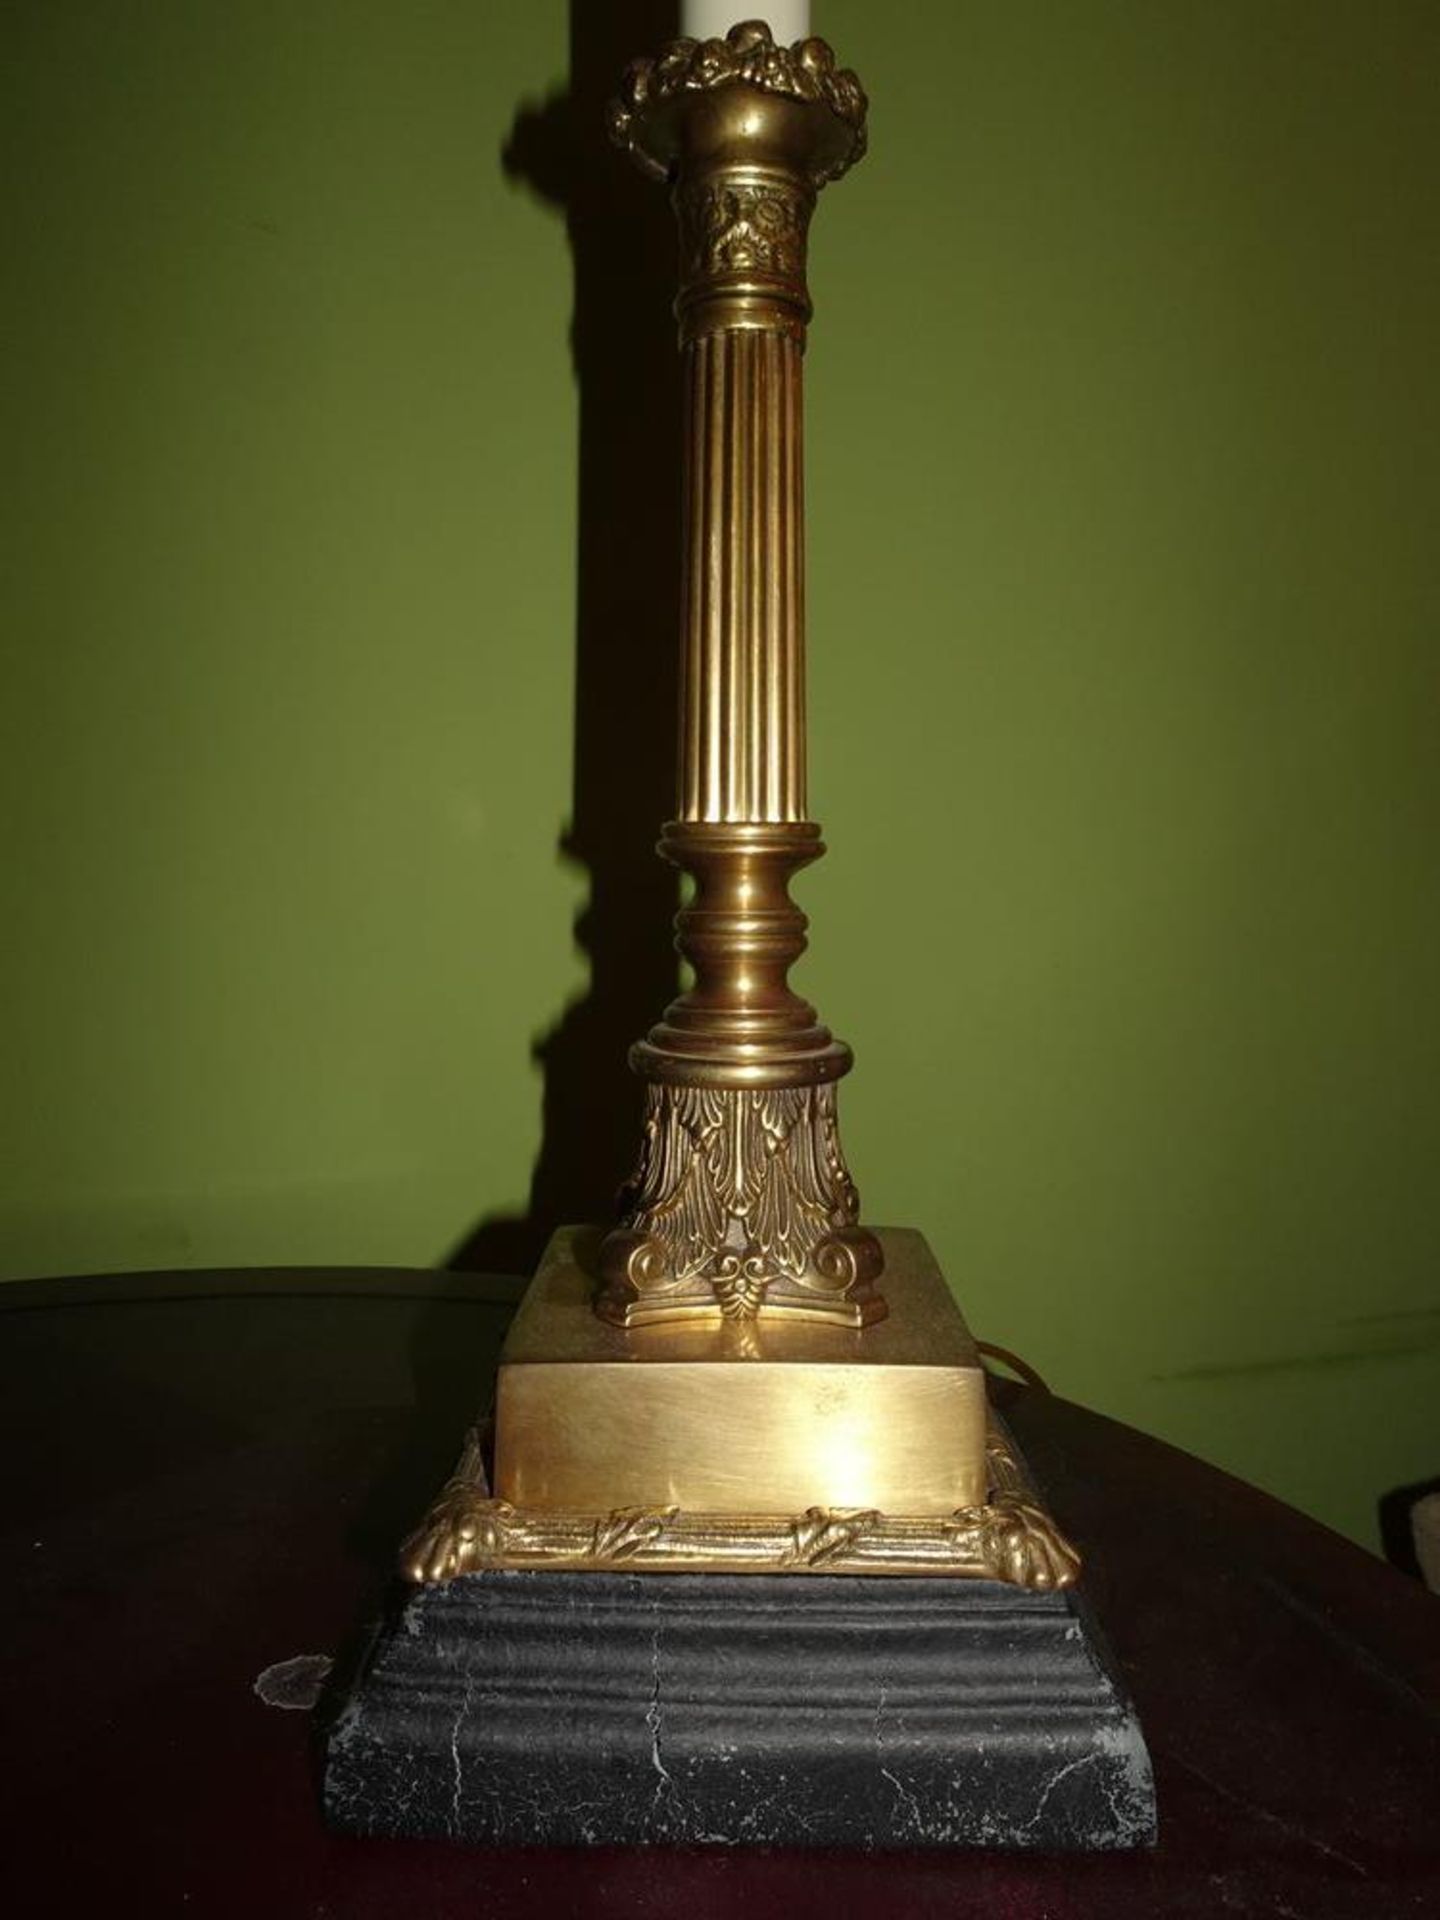 LOT (2) TABLE LAMP - ANTIQUE BRASS BASE, SILKEN SHADE (DAMAGE TO ONE SHADE) - Image 9 of 10